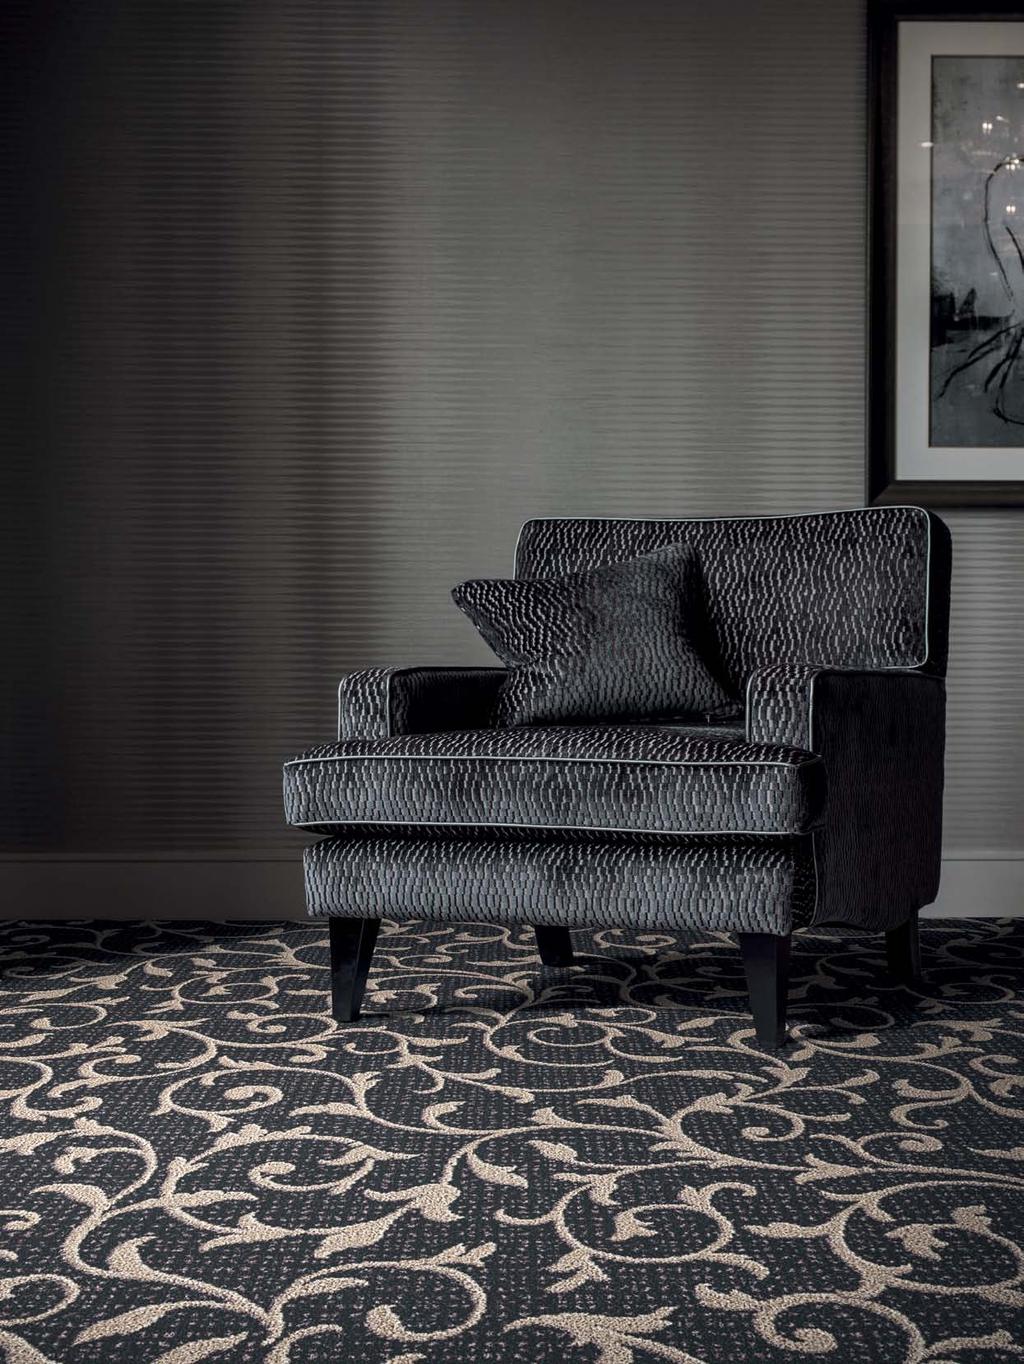 contempor ary cl assics Create a truly individual look to your interior with this beautiful mix and match collection of carpet